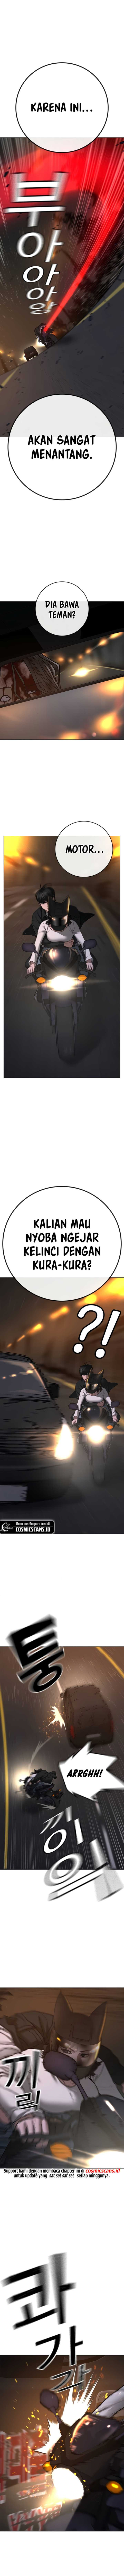 Reality Quest Chapter 86